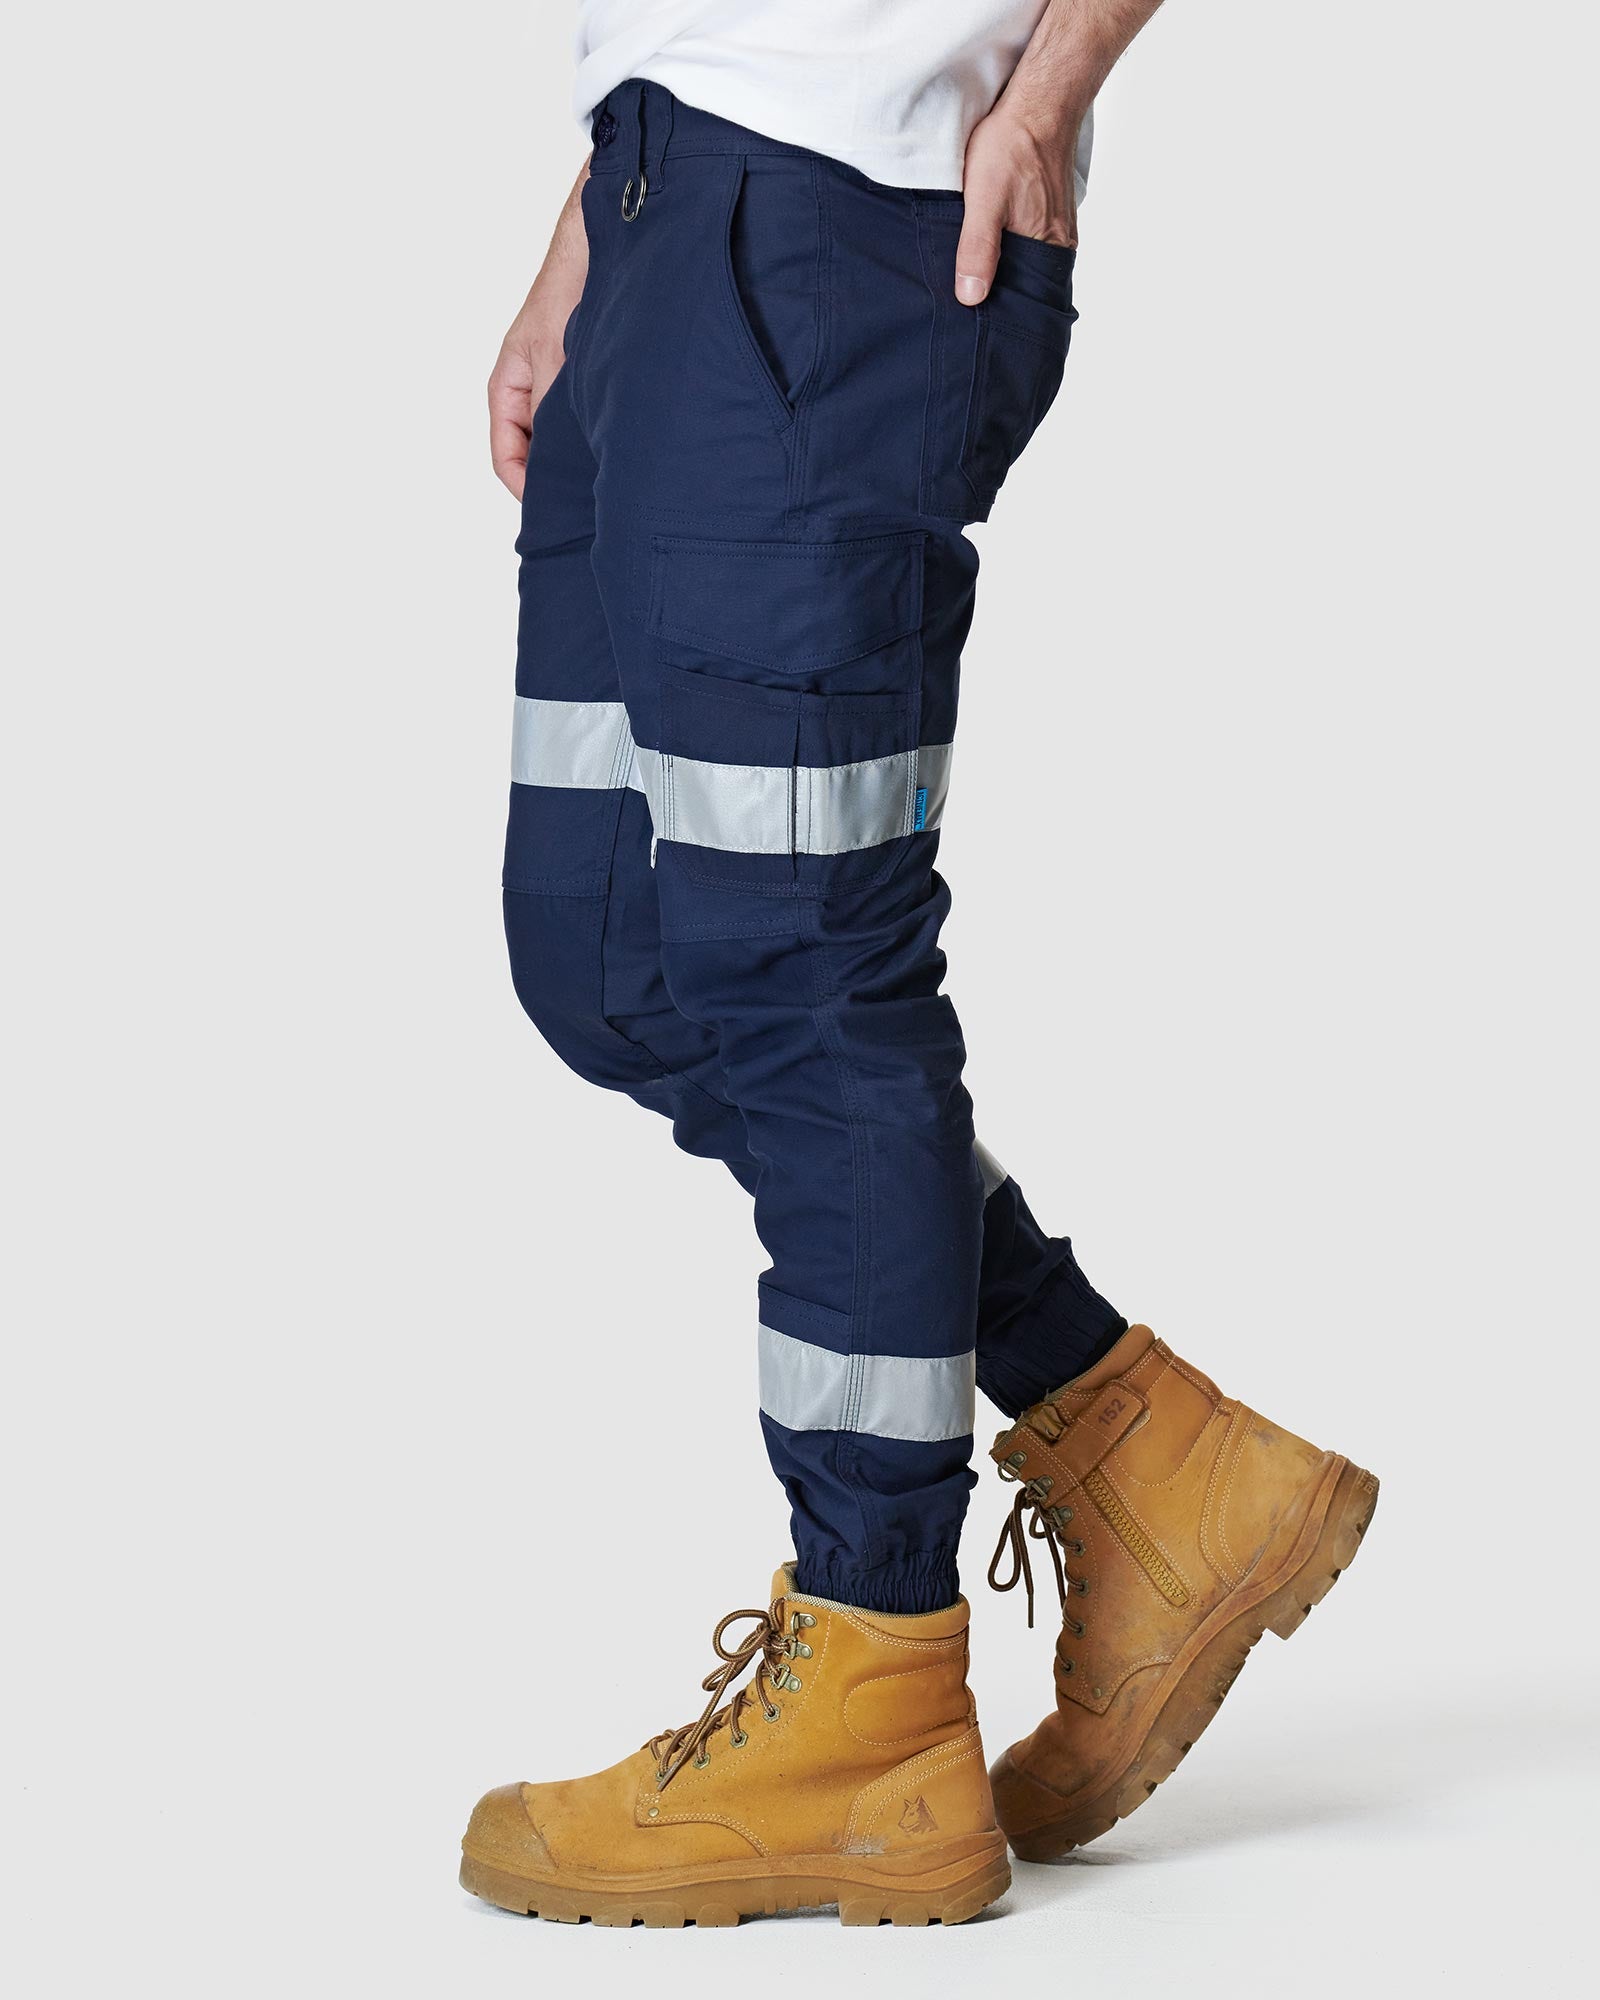 FXD WP4 CUFFED WORK PANTS  Workboot Warehouse safety footwear work boots